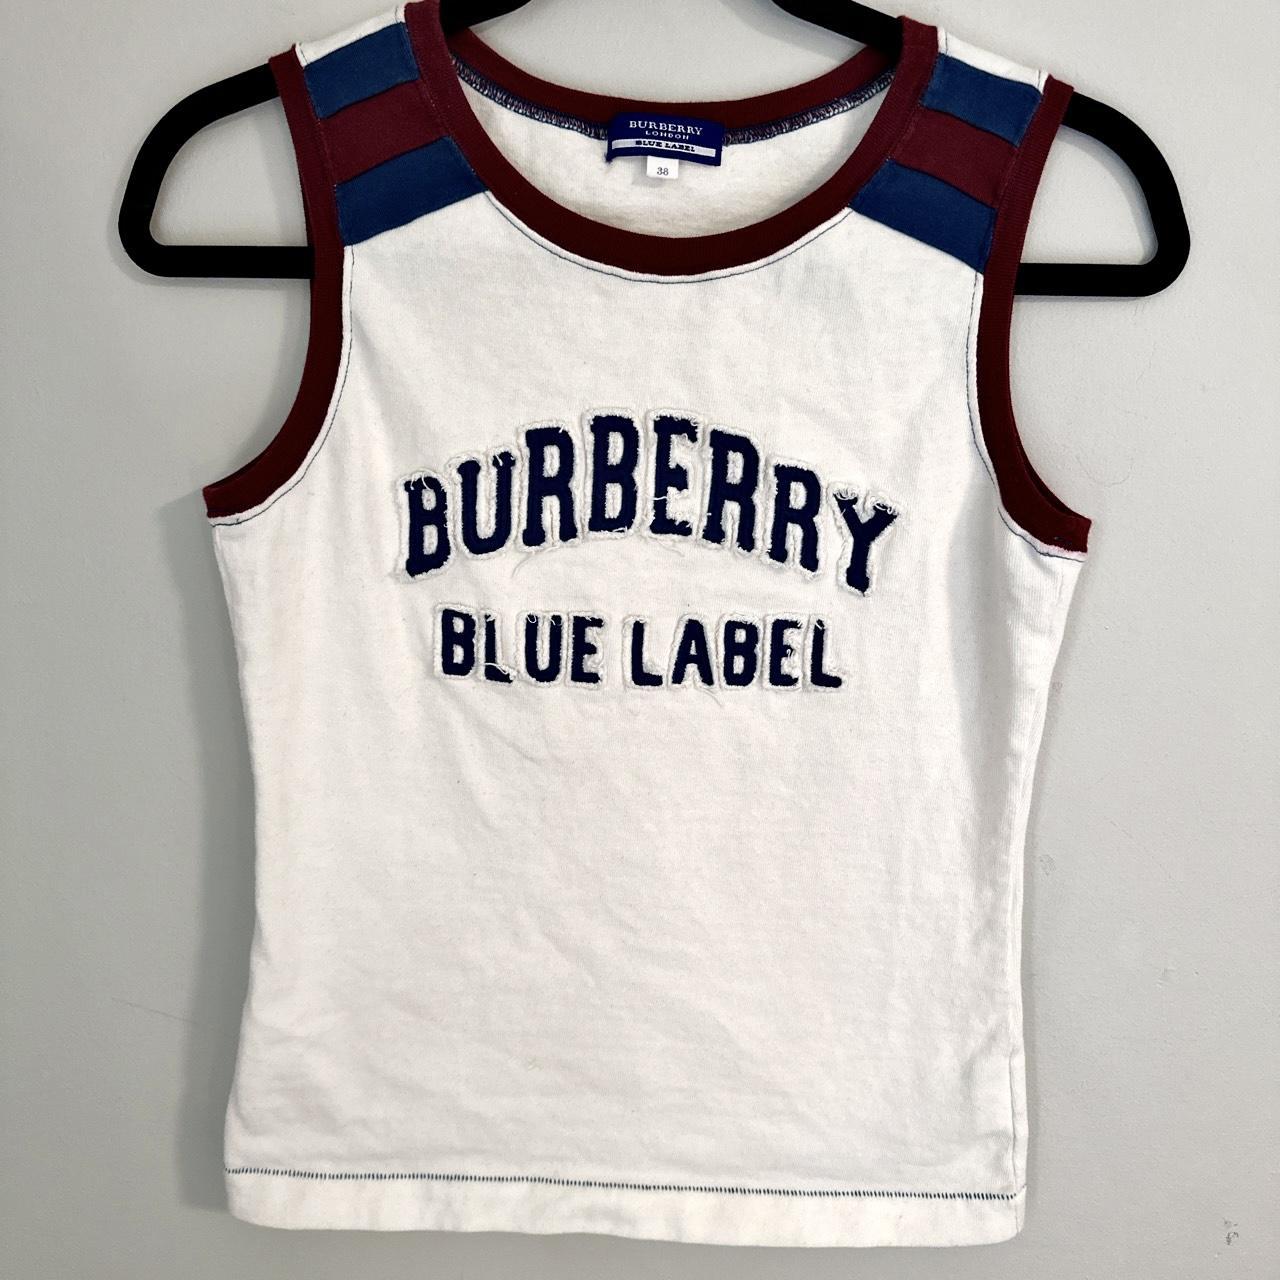 Burberry Women's White and Navy Vest